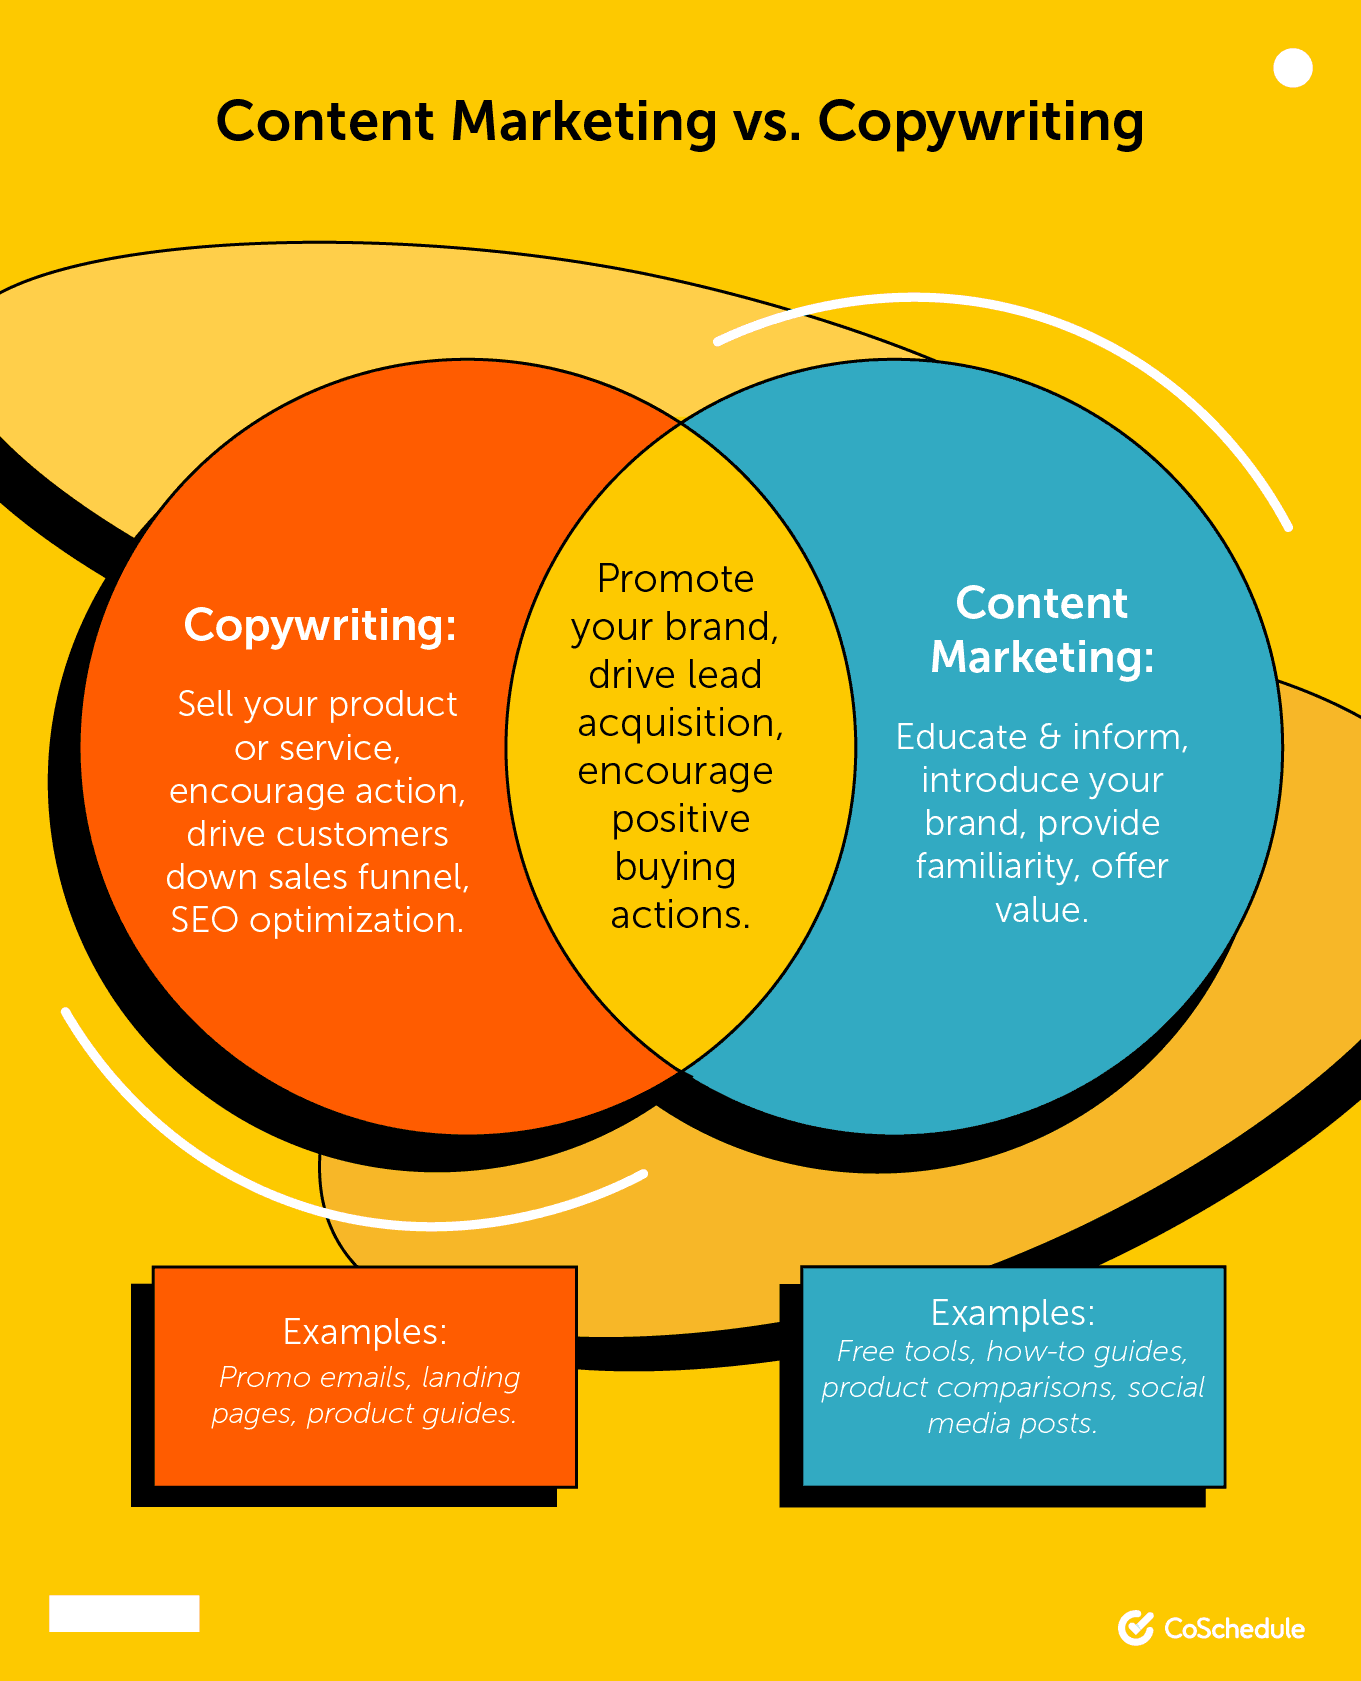 Content marketing compared to copywriting